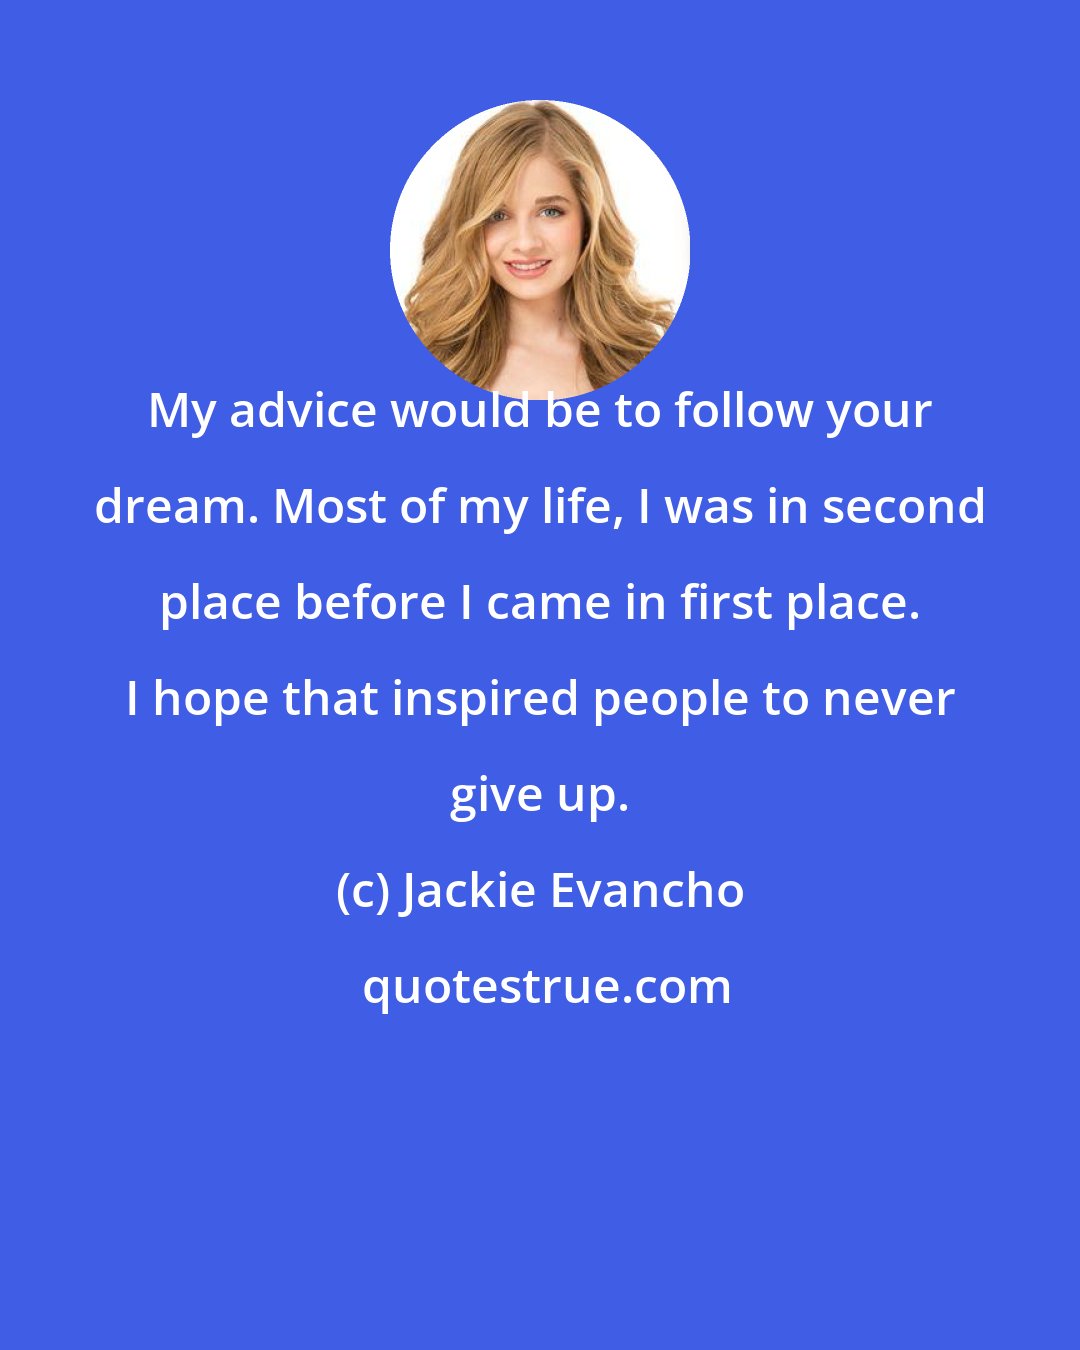 Jackie Evancho: My advice would be to follow your dream. Most of my life, I was in second place before I came in first place. I hope that inspired people to never give up.